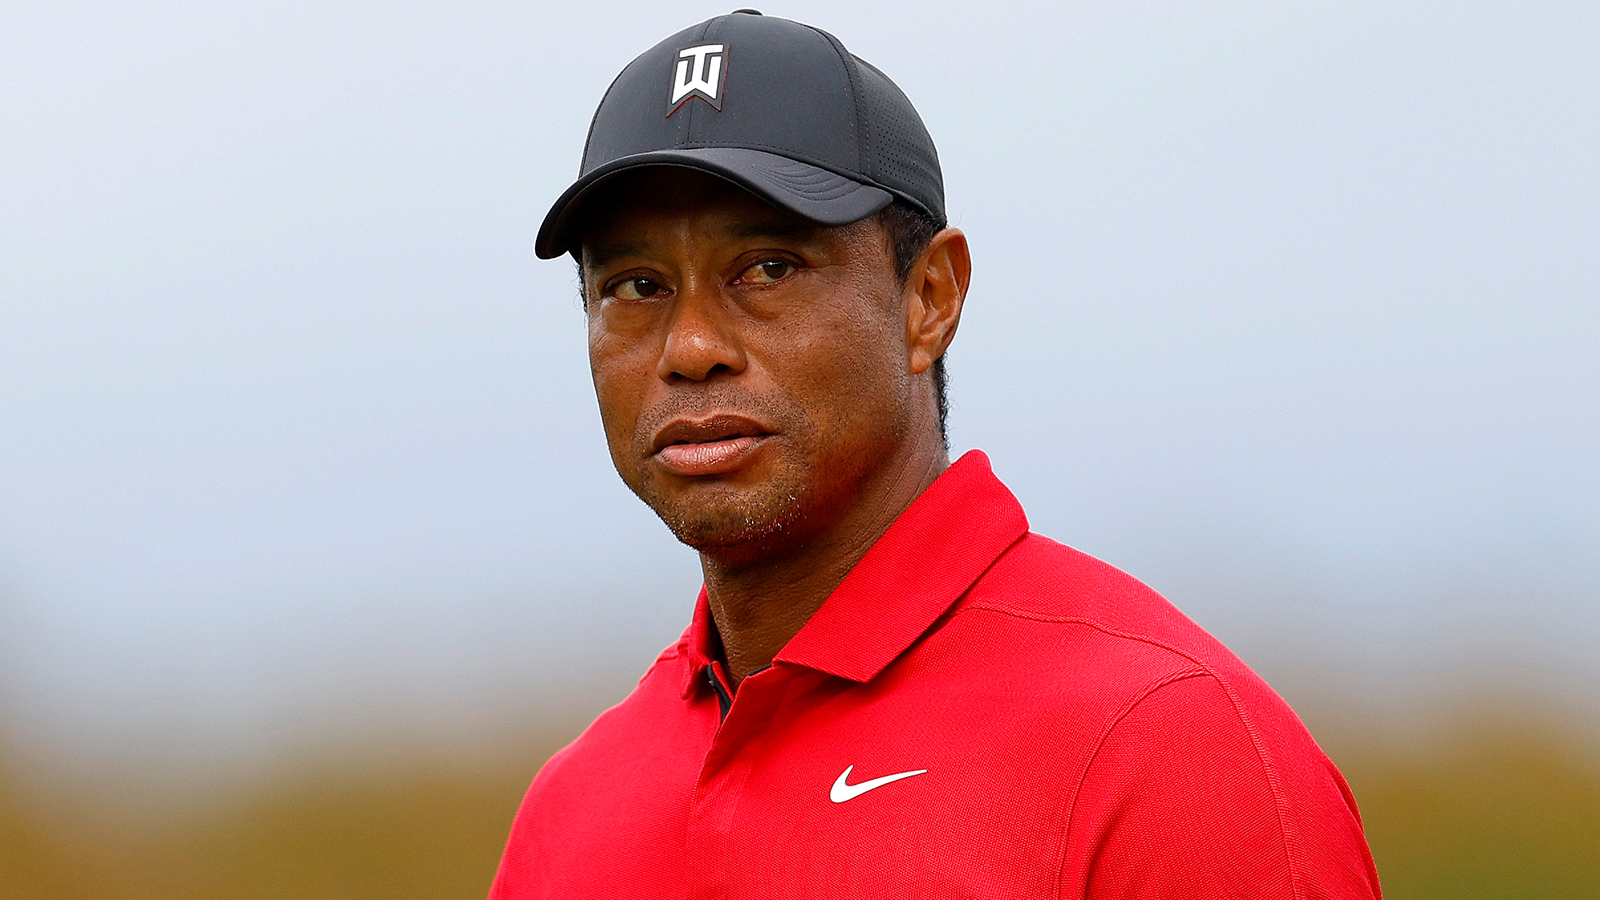 Tiger Woods Gets Lifetime Exemption To Some PGA Tour Events